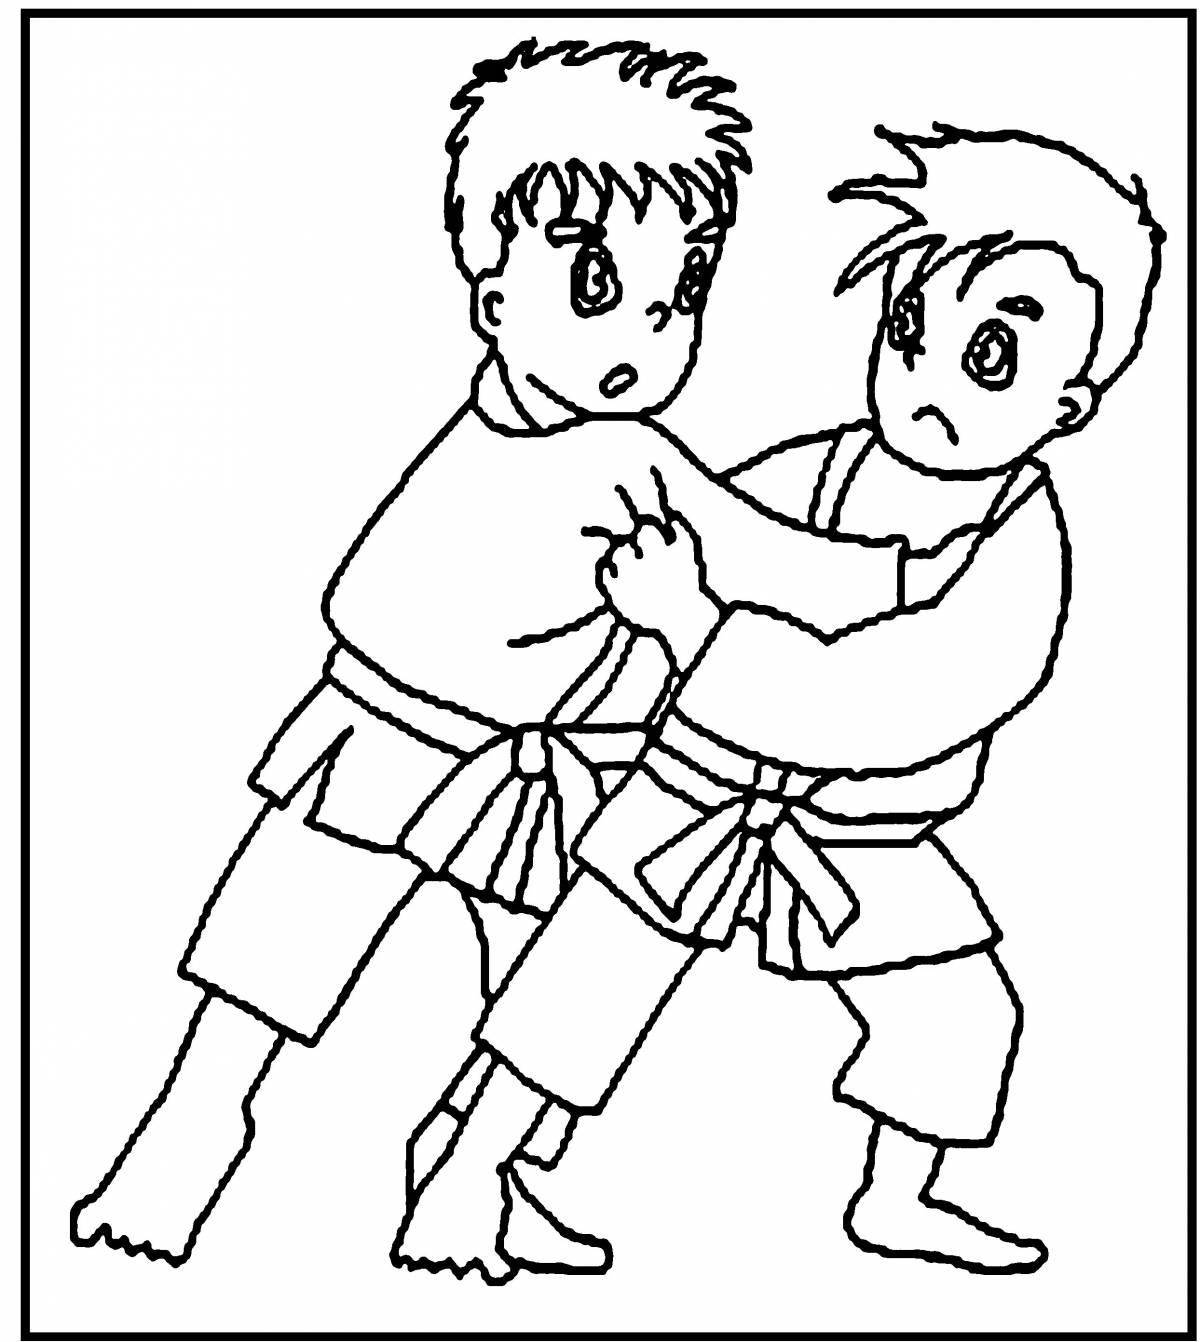 Karate for kids coloring book